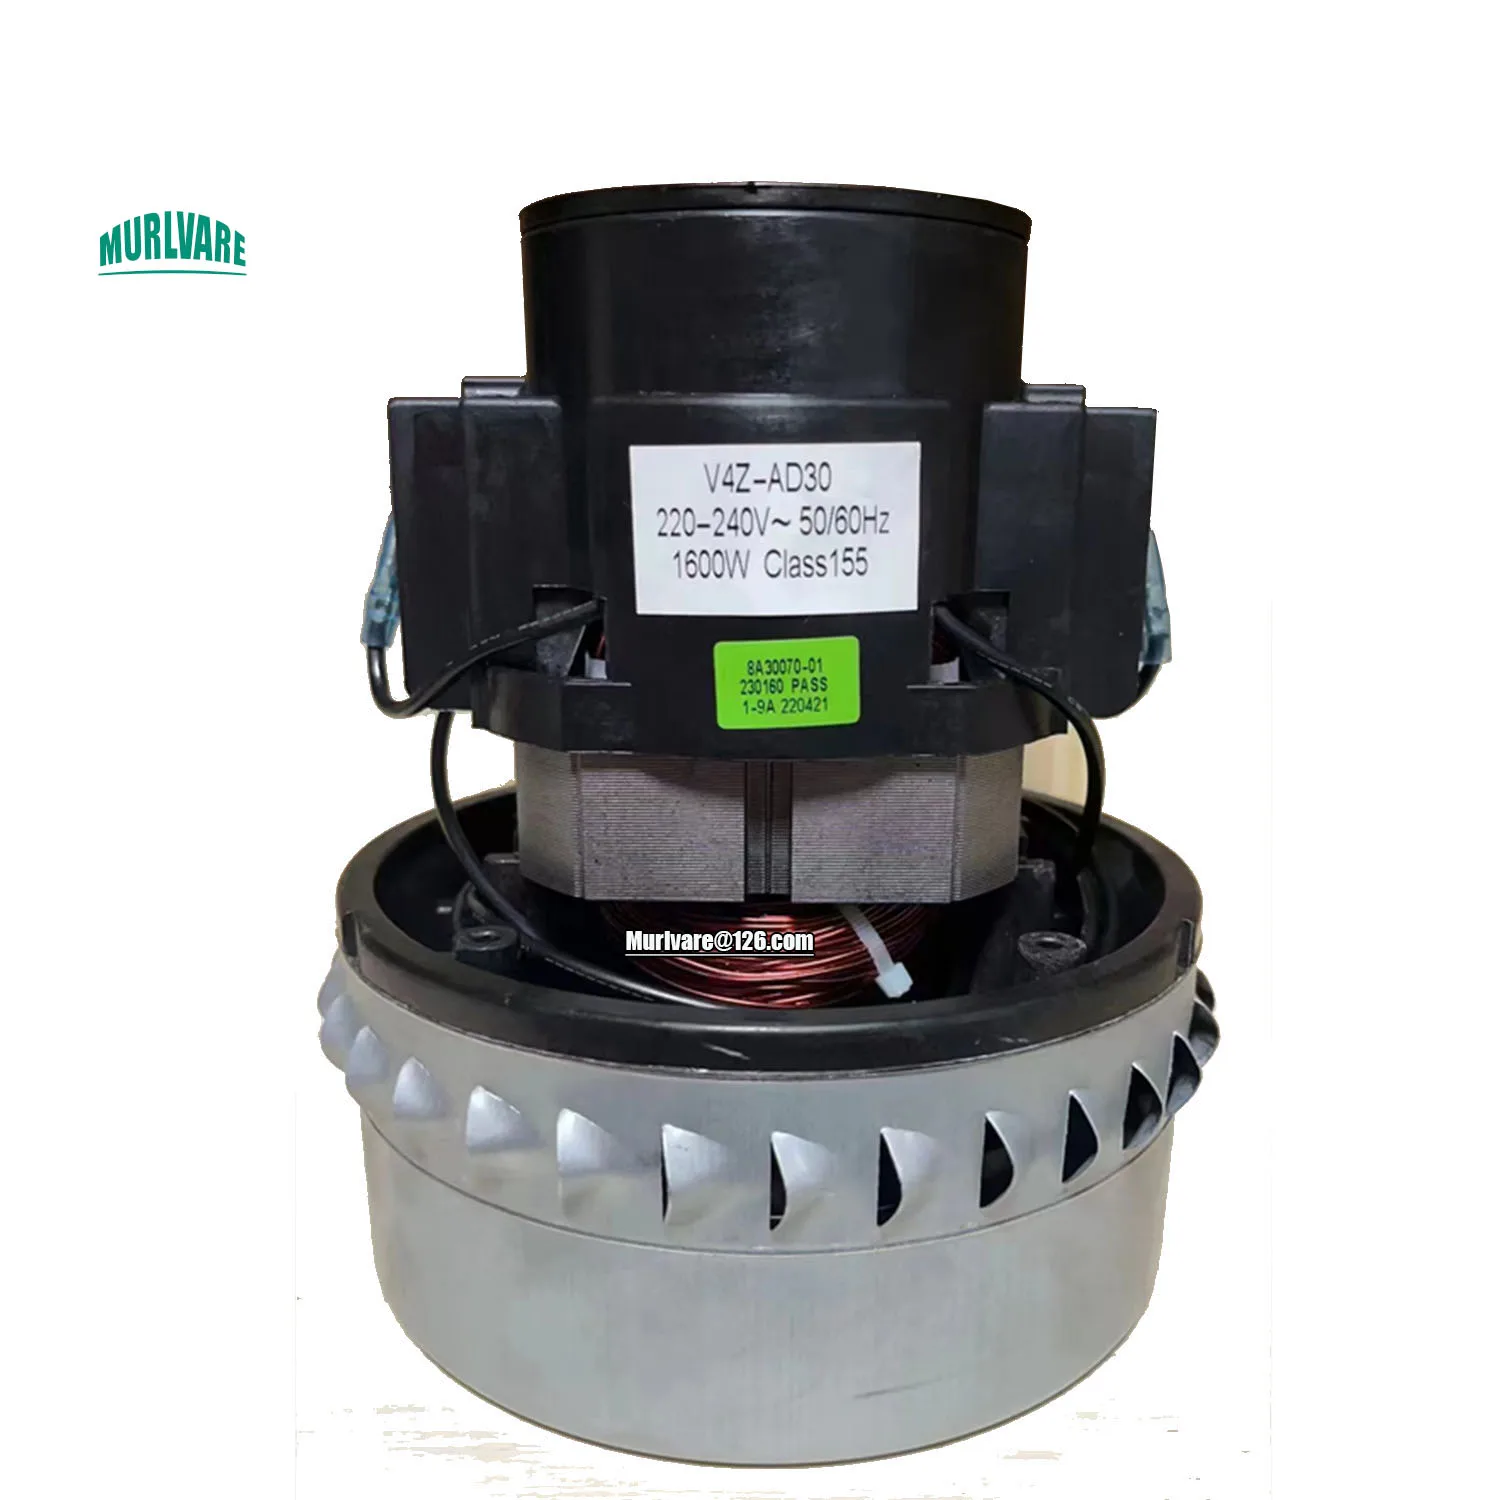 

V4Z-AD30 1600W Single Phase Series Excited Motor For Vacuum Cleaner